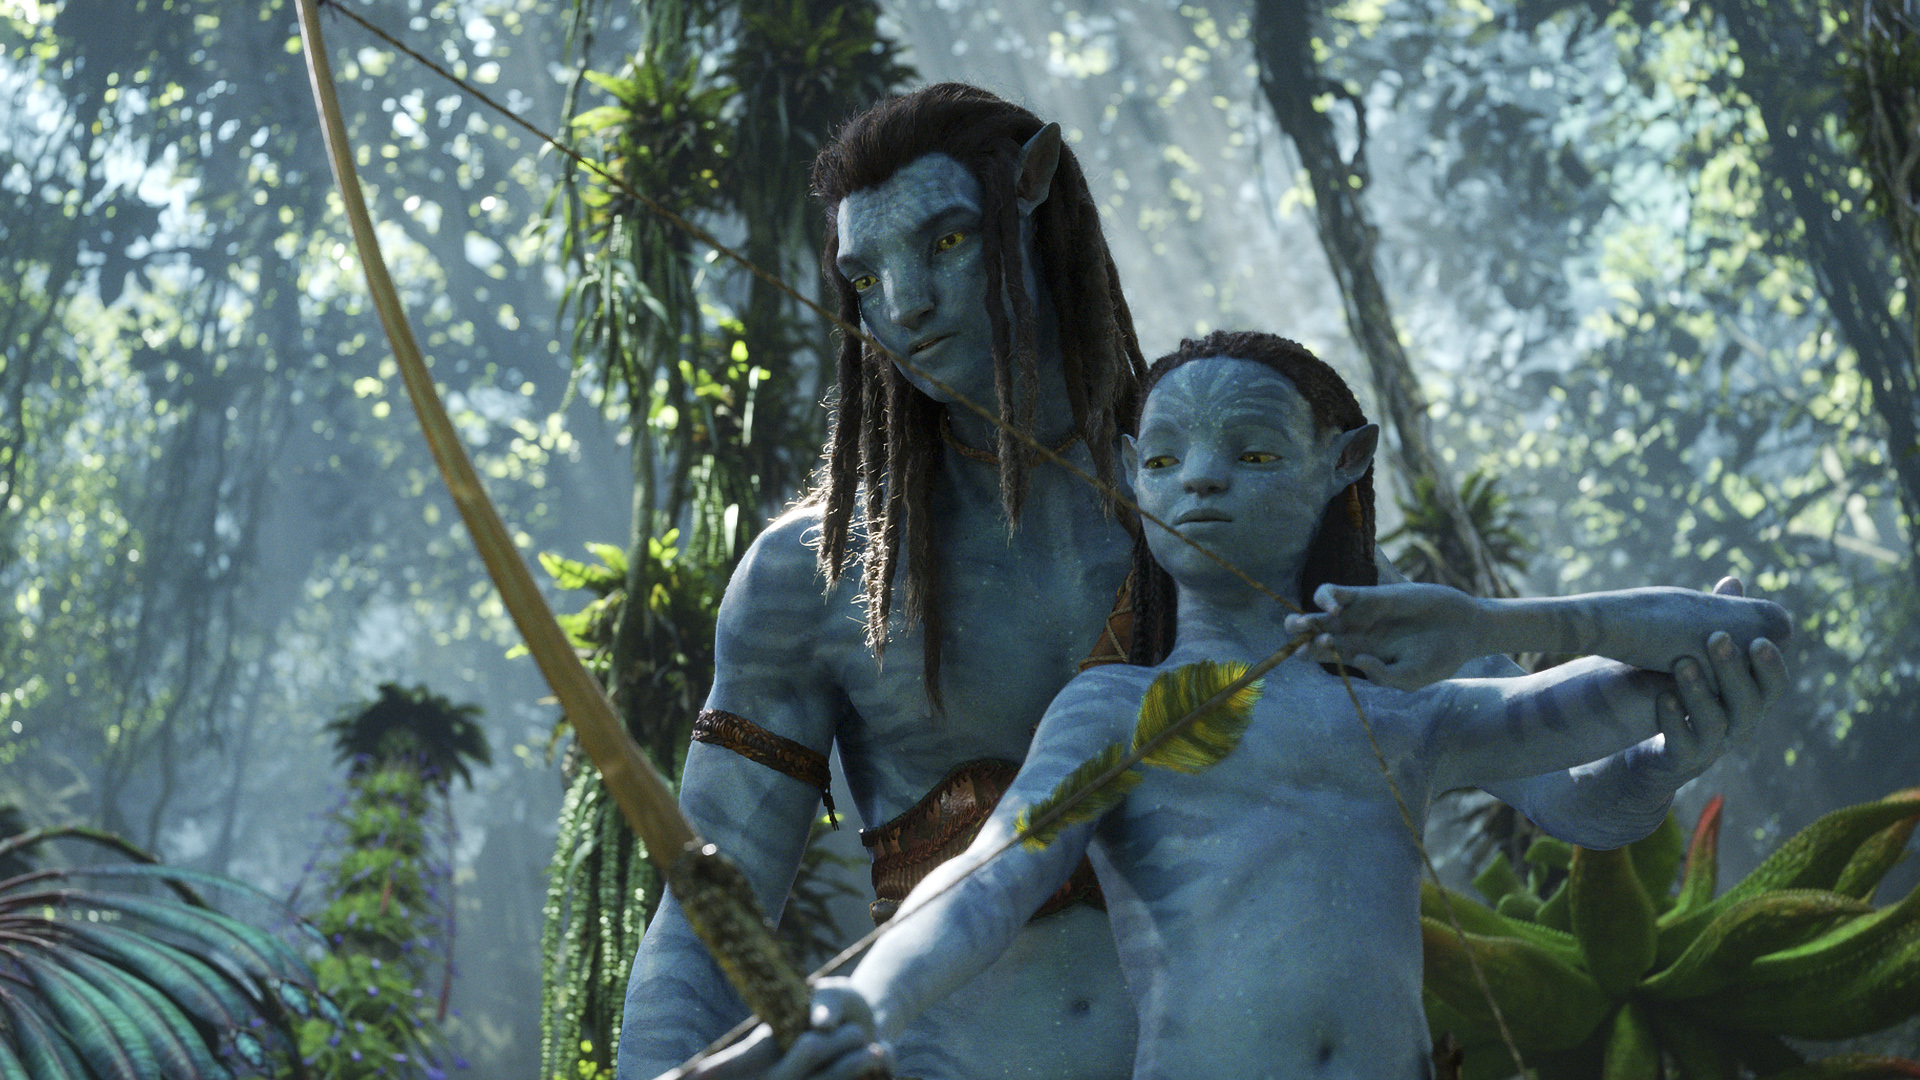 Jake stands over Kiri as she aims an arrow at a fish off-camera in Avatar: The Way of Water